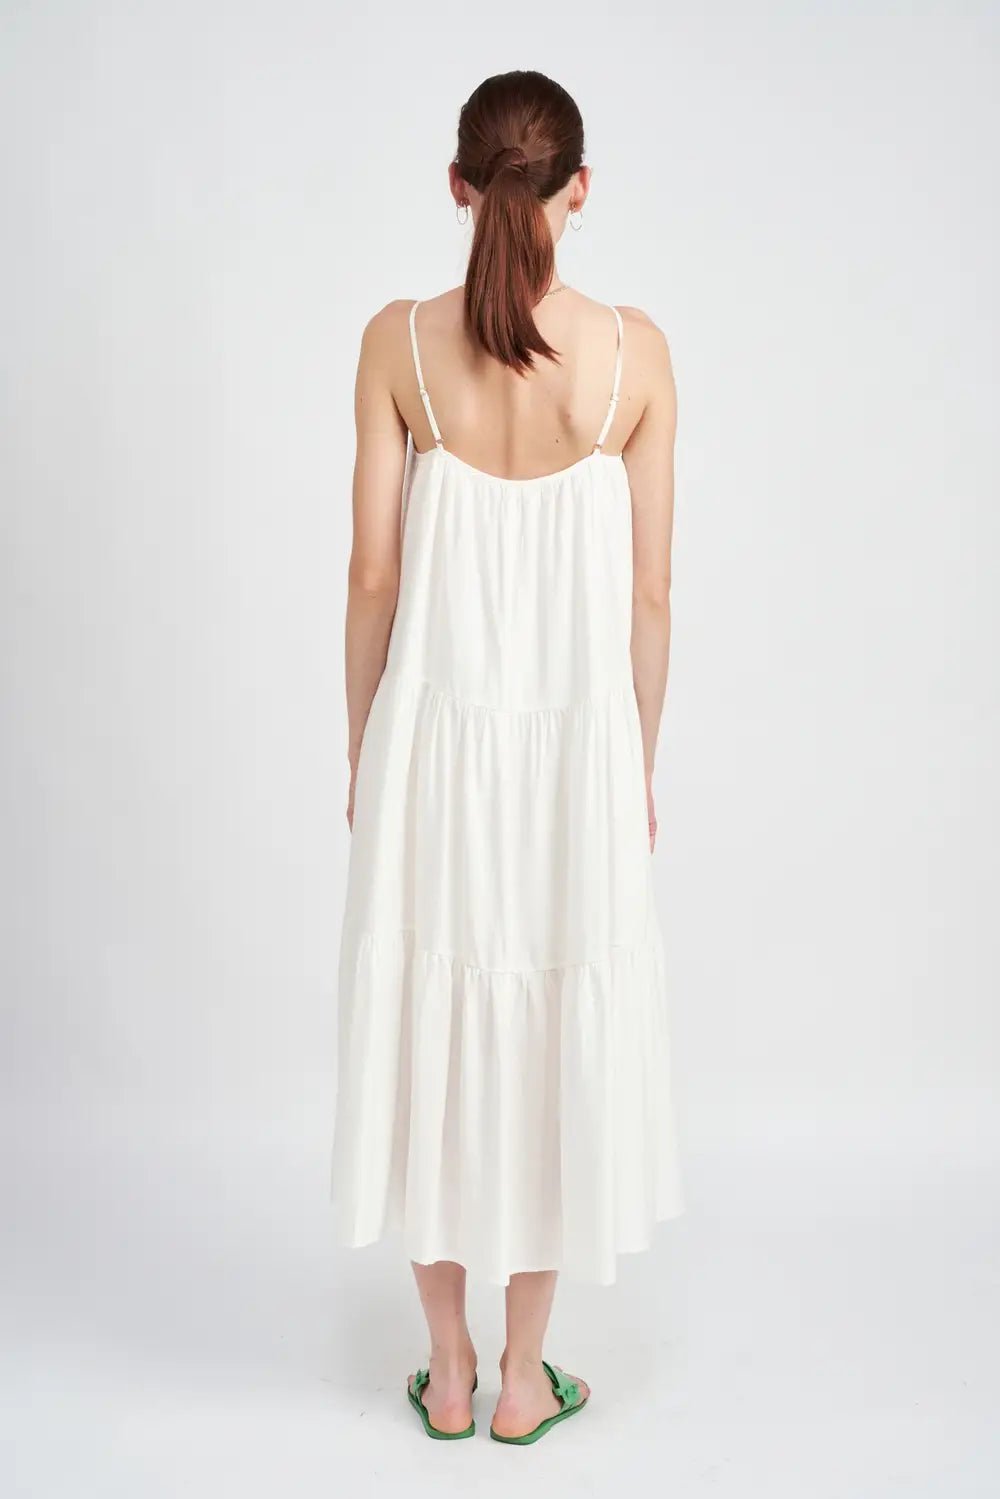 Go With The Flow Maxi